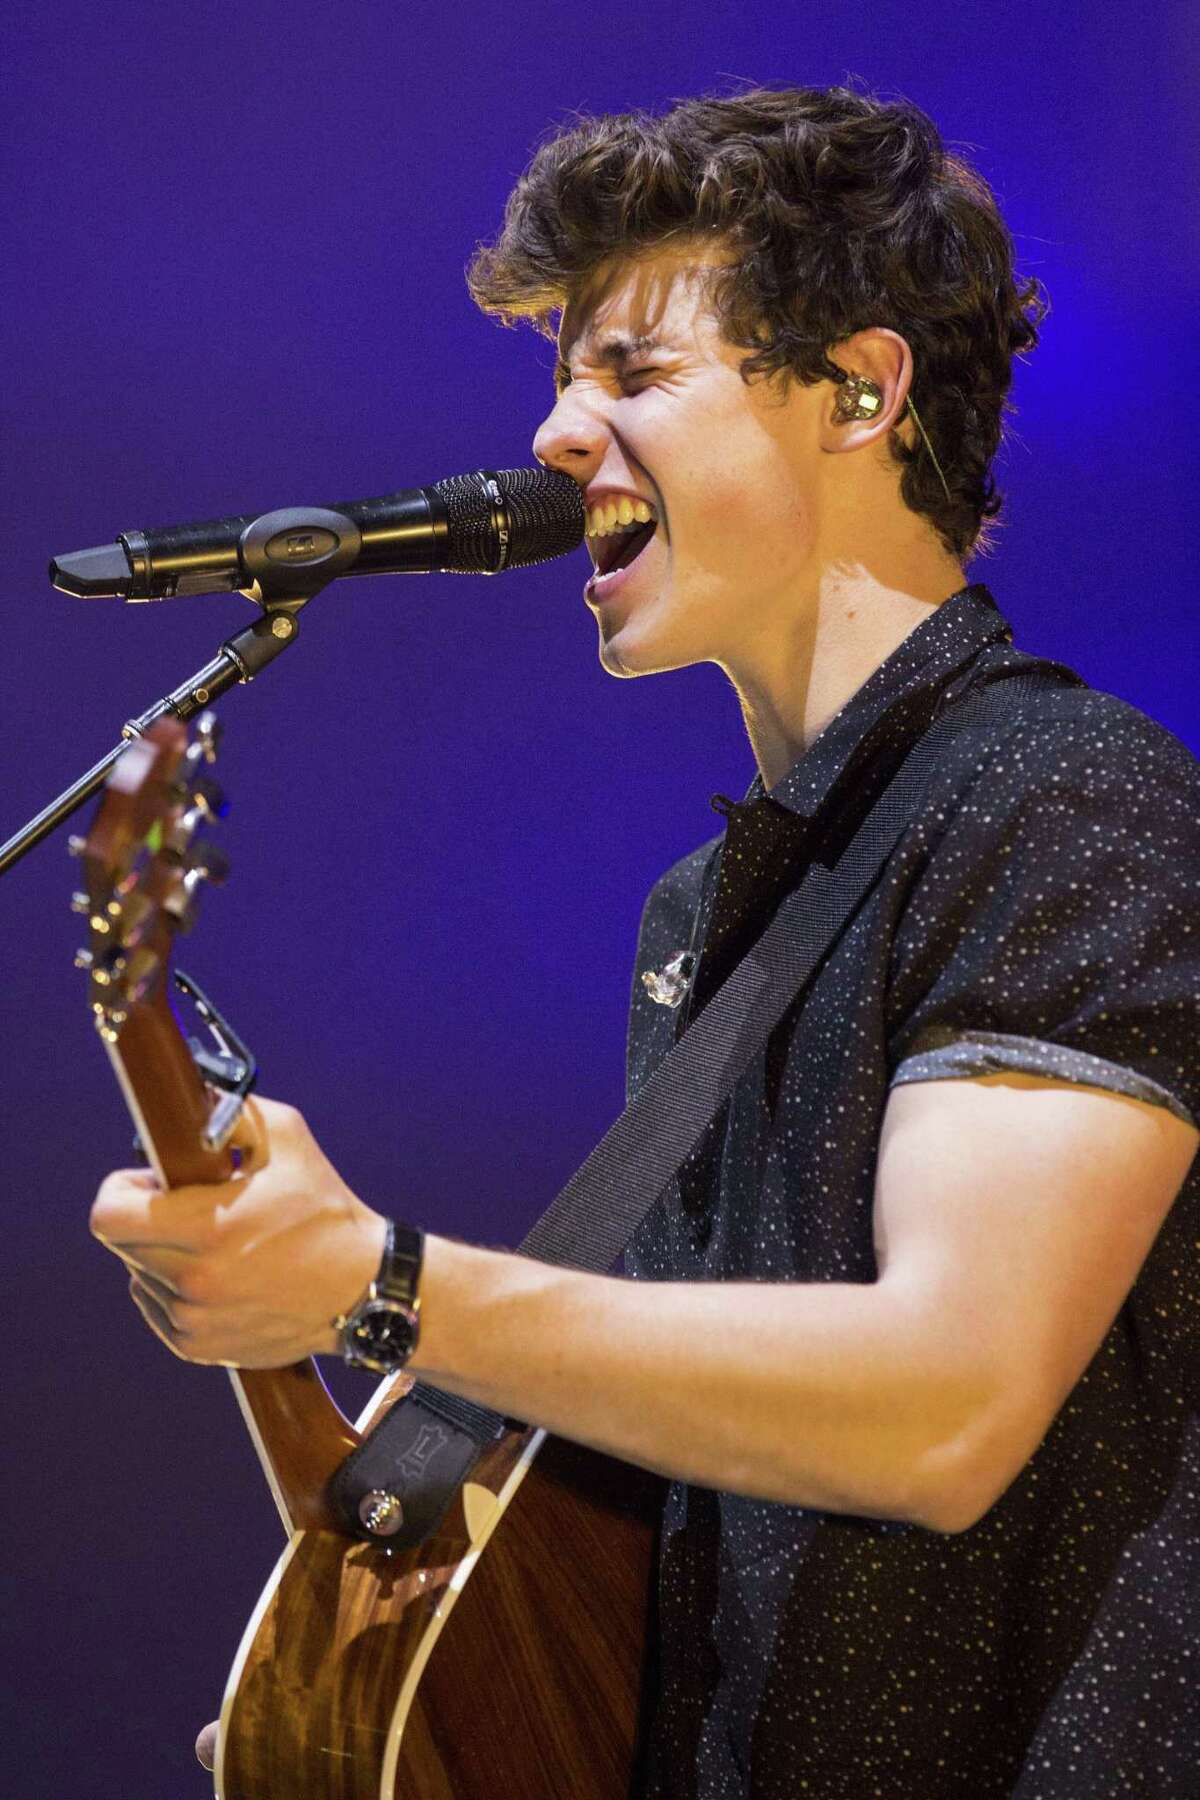 Shawn Mendes performs Friday at the AT&T Center in San Antonio.